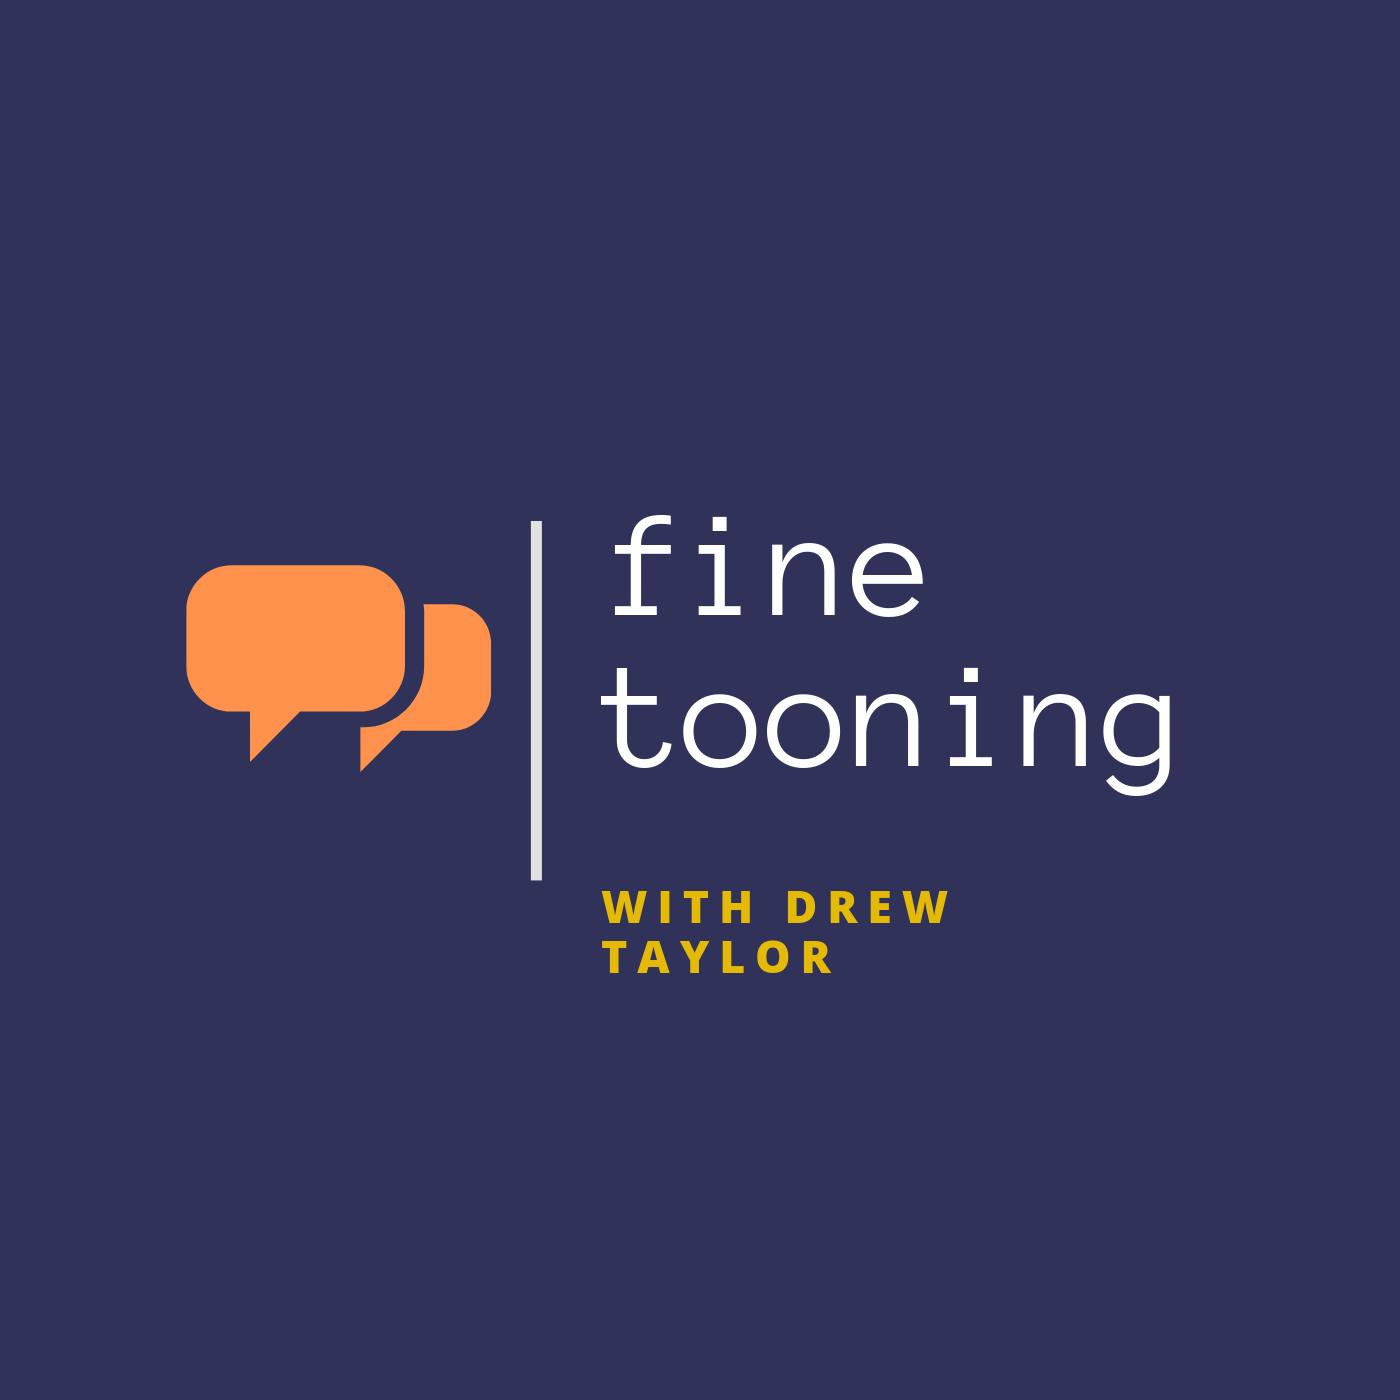 Fine Tooning with Drew Taylor - Episode 179: What Disney revealed at this year’s Annecy Animation Festival 2022 Image